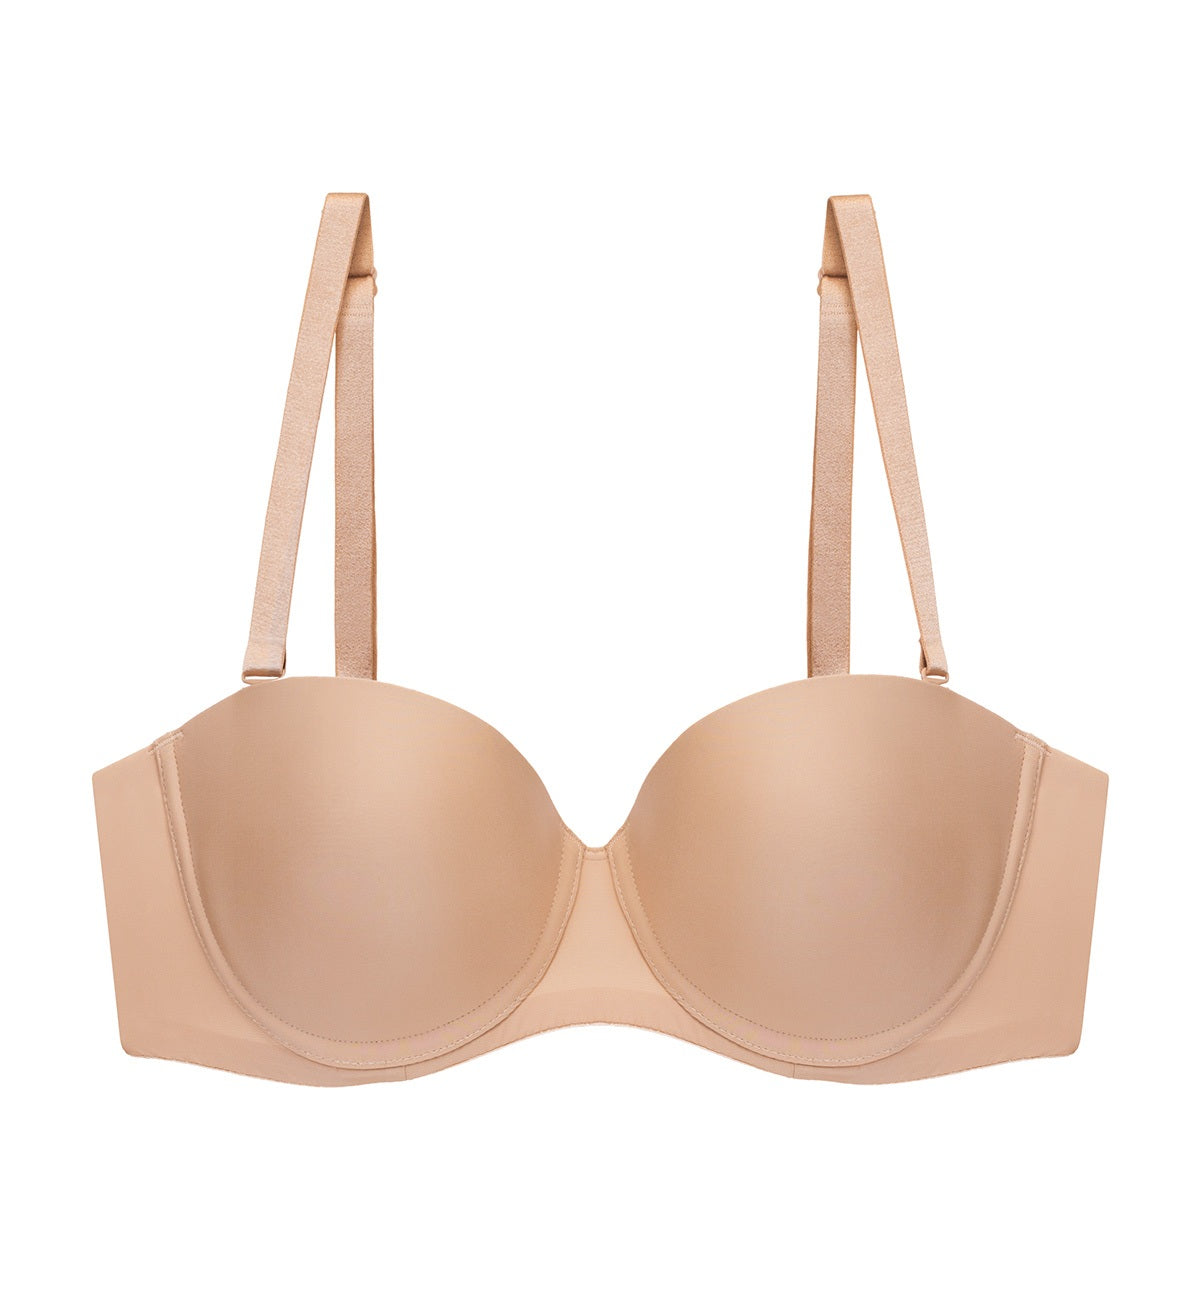 Buy Strapless Non-Wired Push-up Bra with Interchangeable Back Straps Nude  For Women